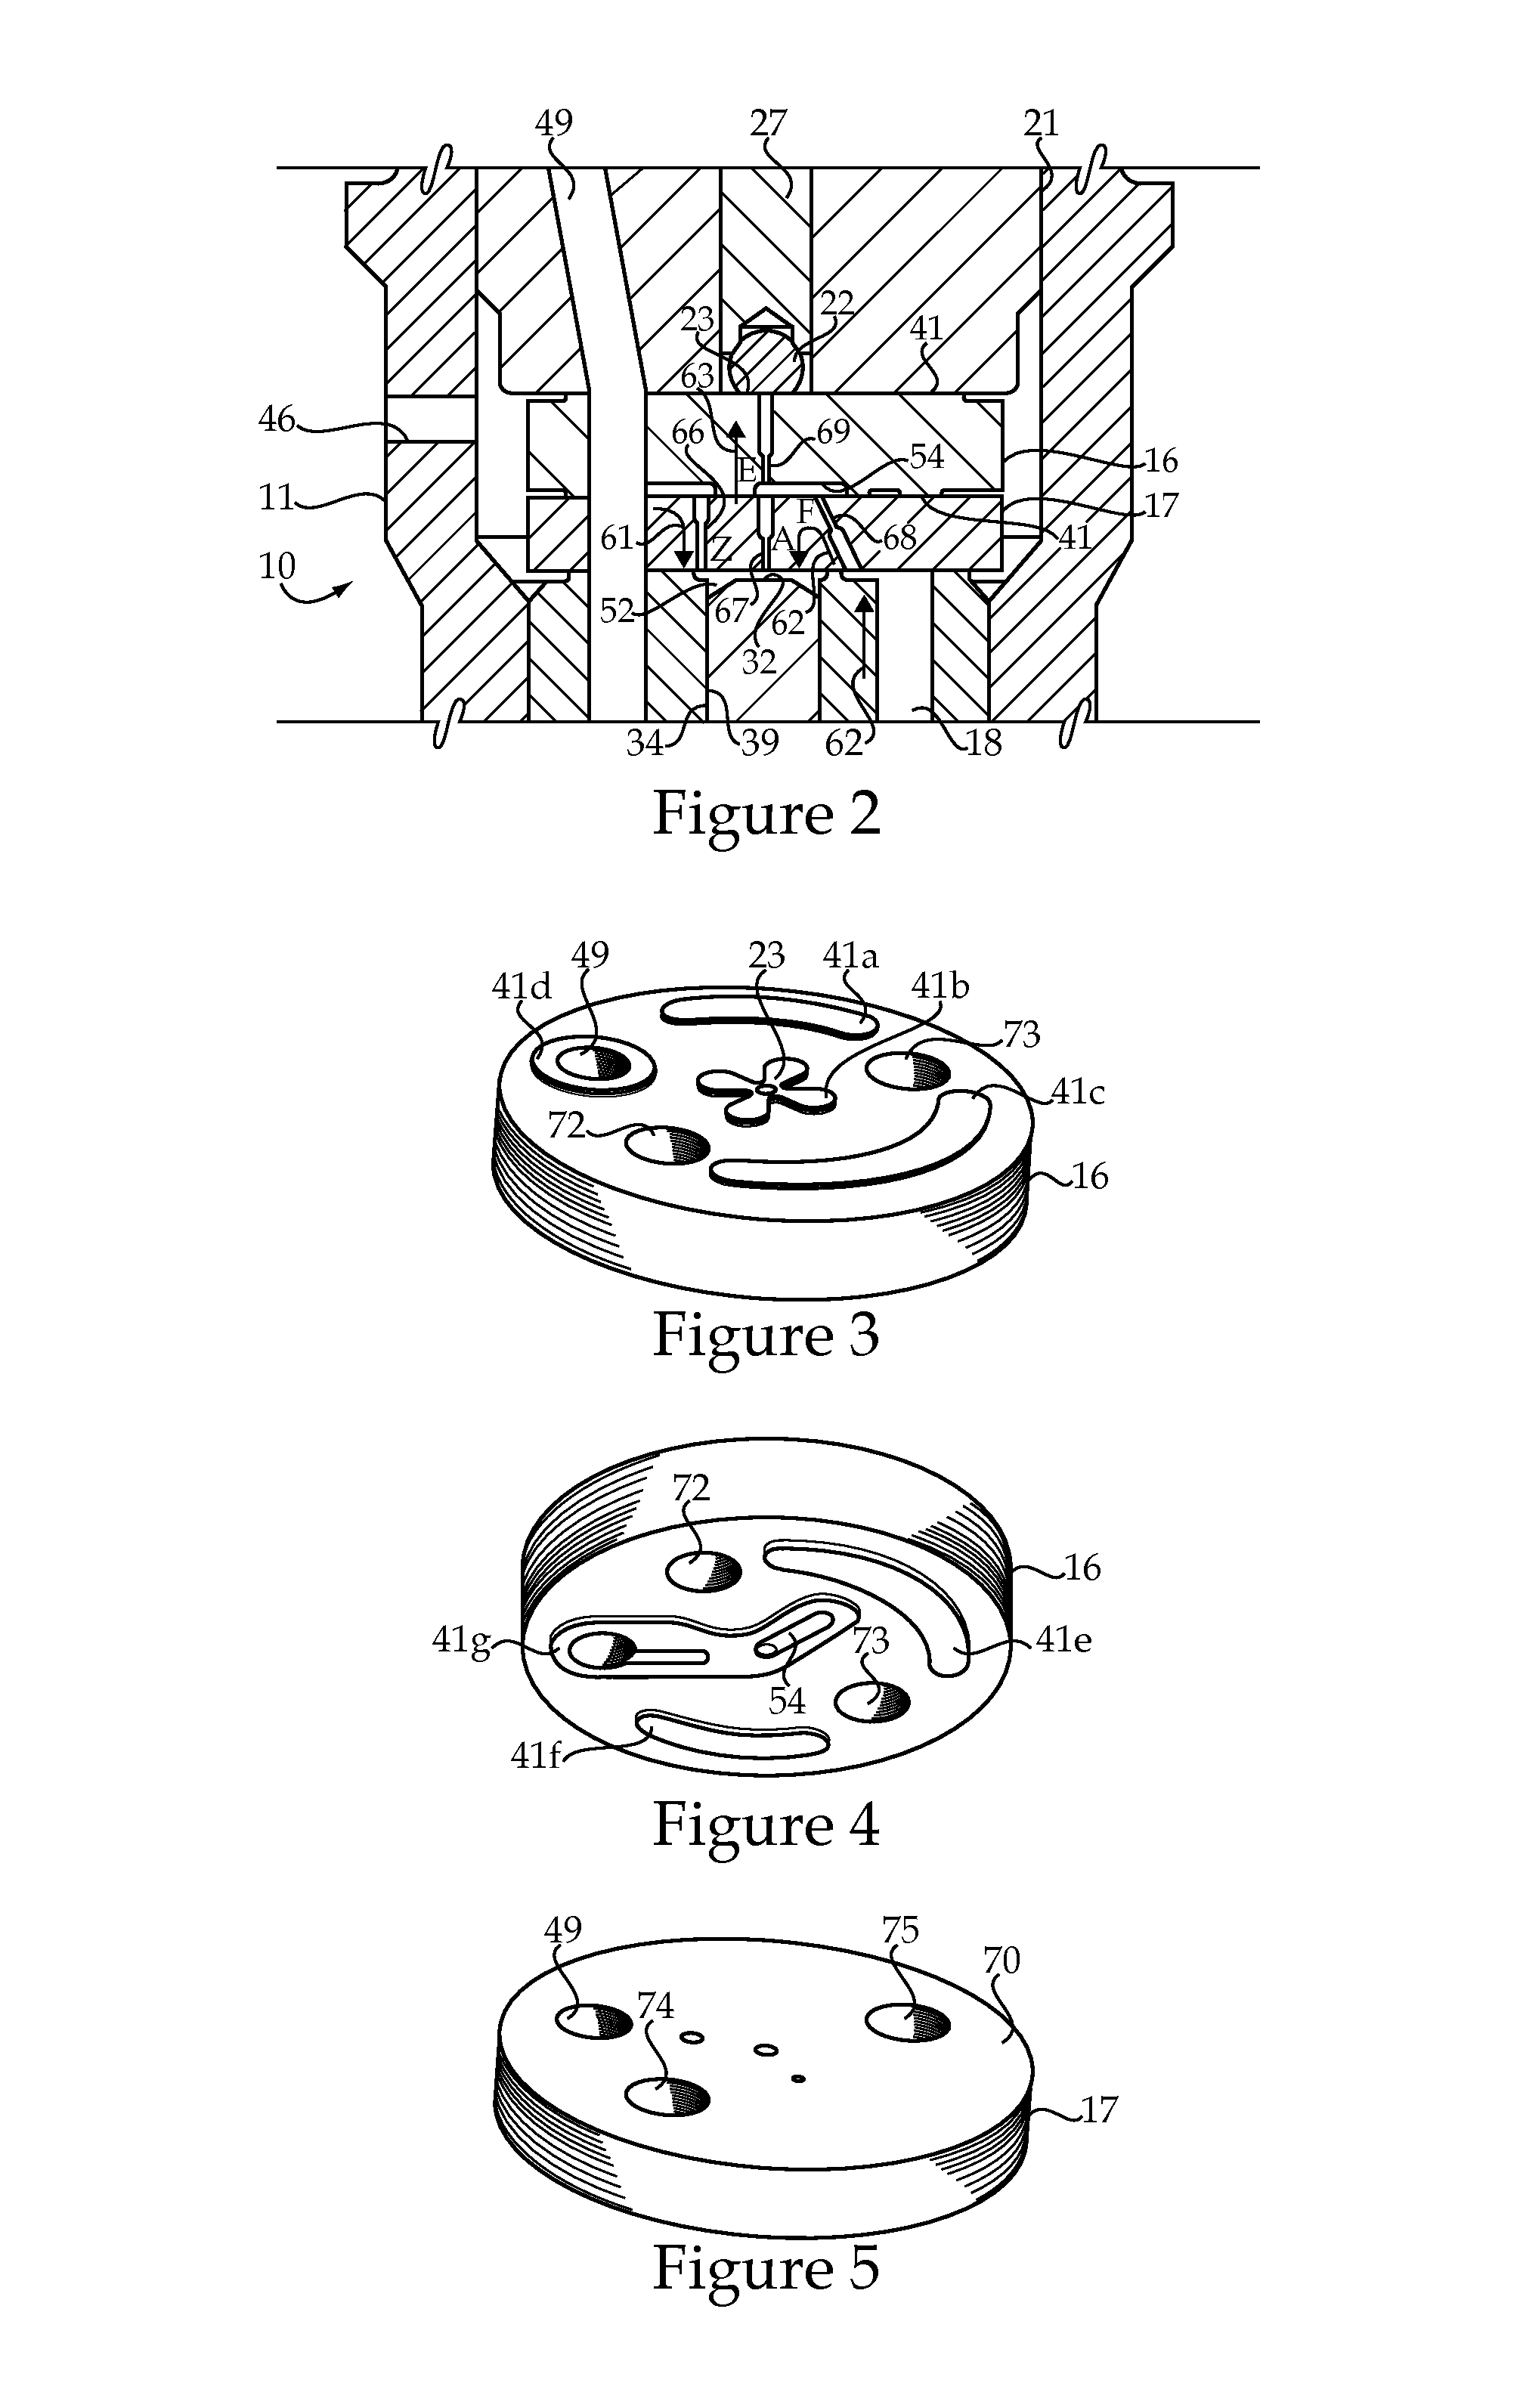 Fuel Injector With Needle Control System That Includes F, A, Z And E Orifices